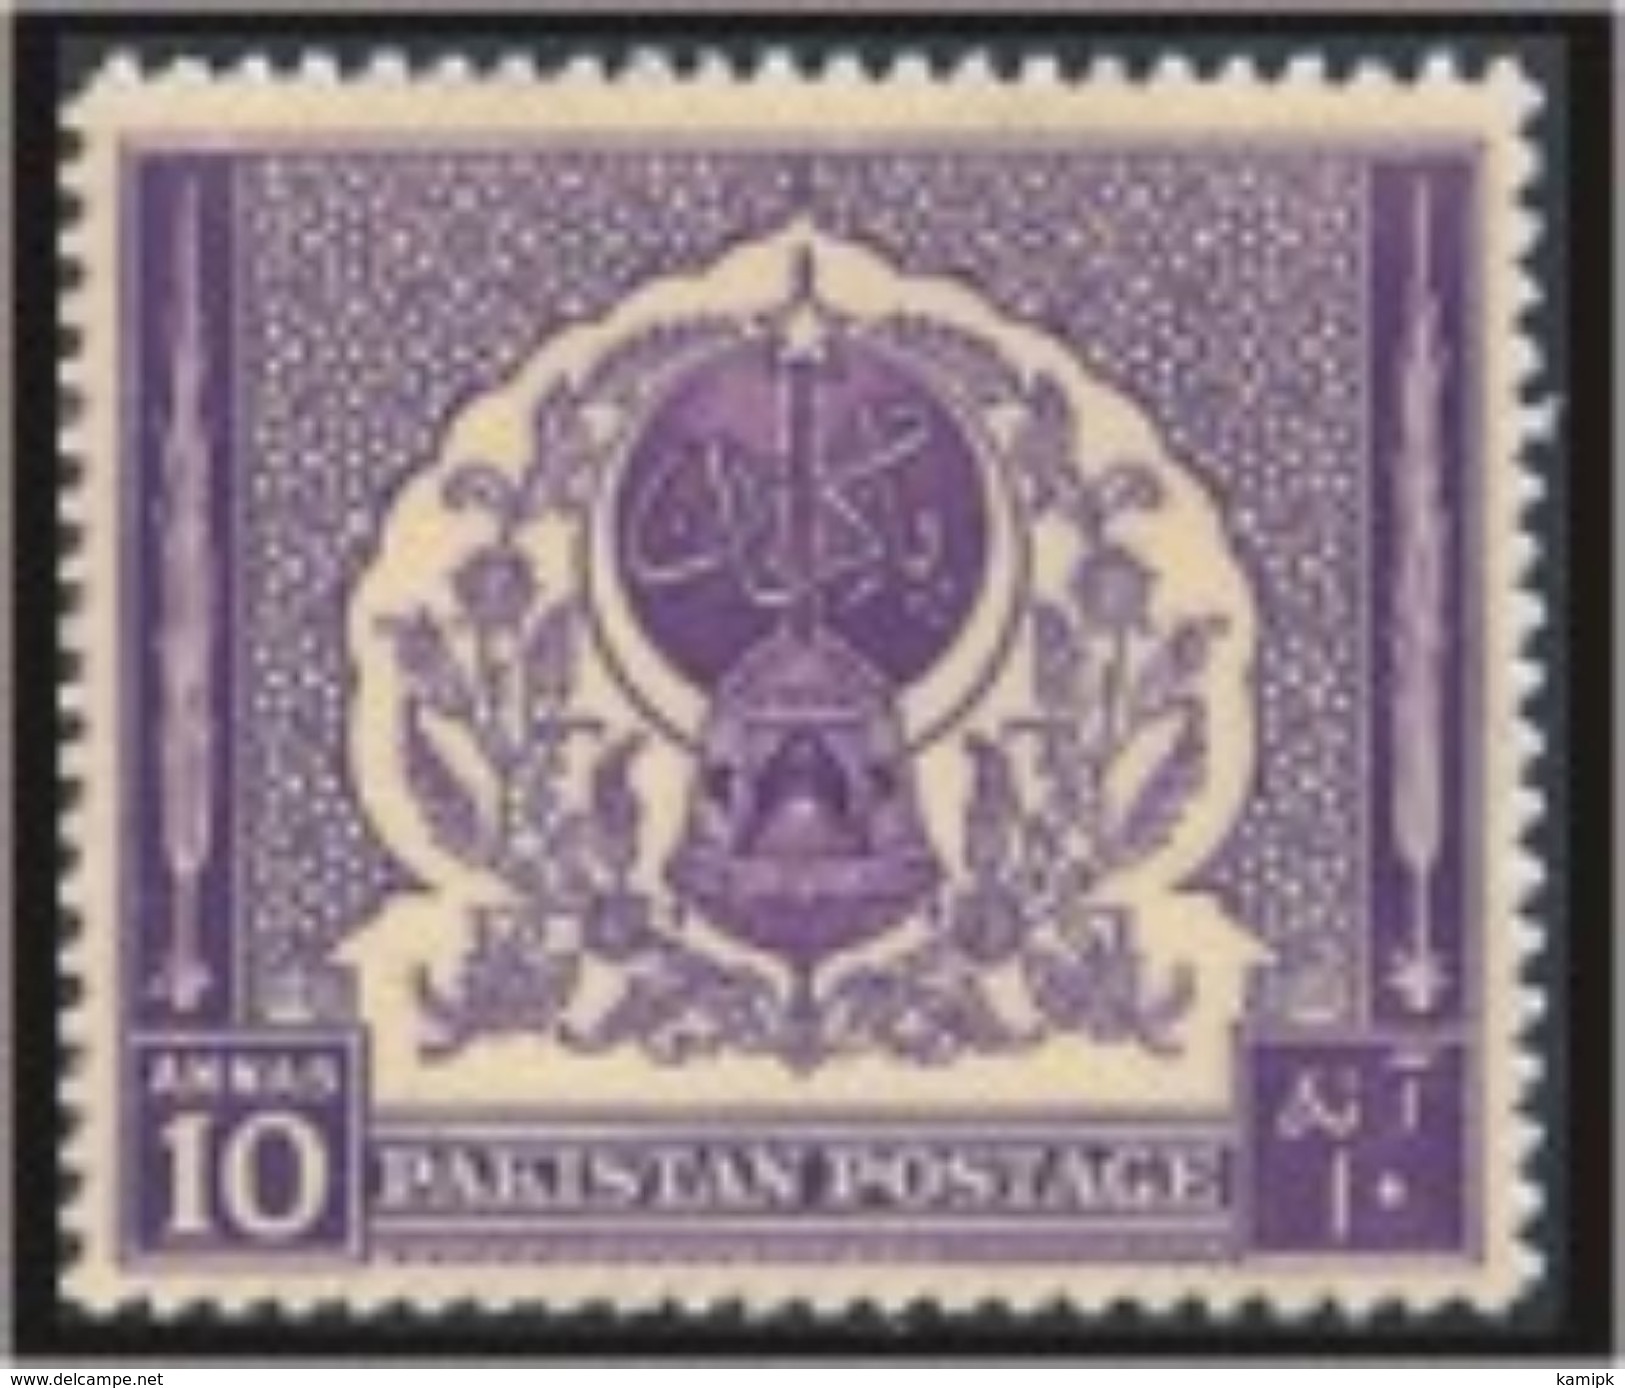 PAKISTAN MNH** STAMPS 4th Anniversary of Independence 14th August 1951